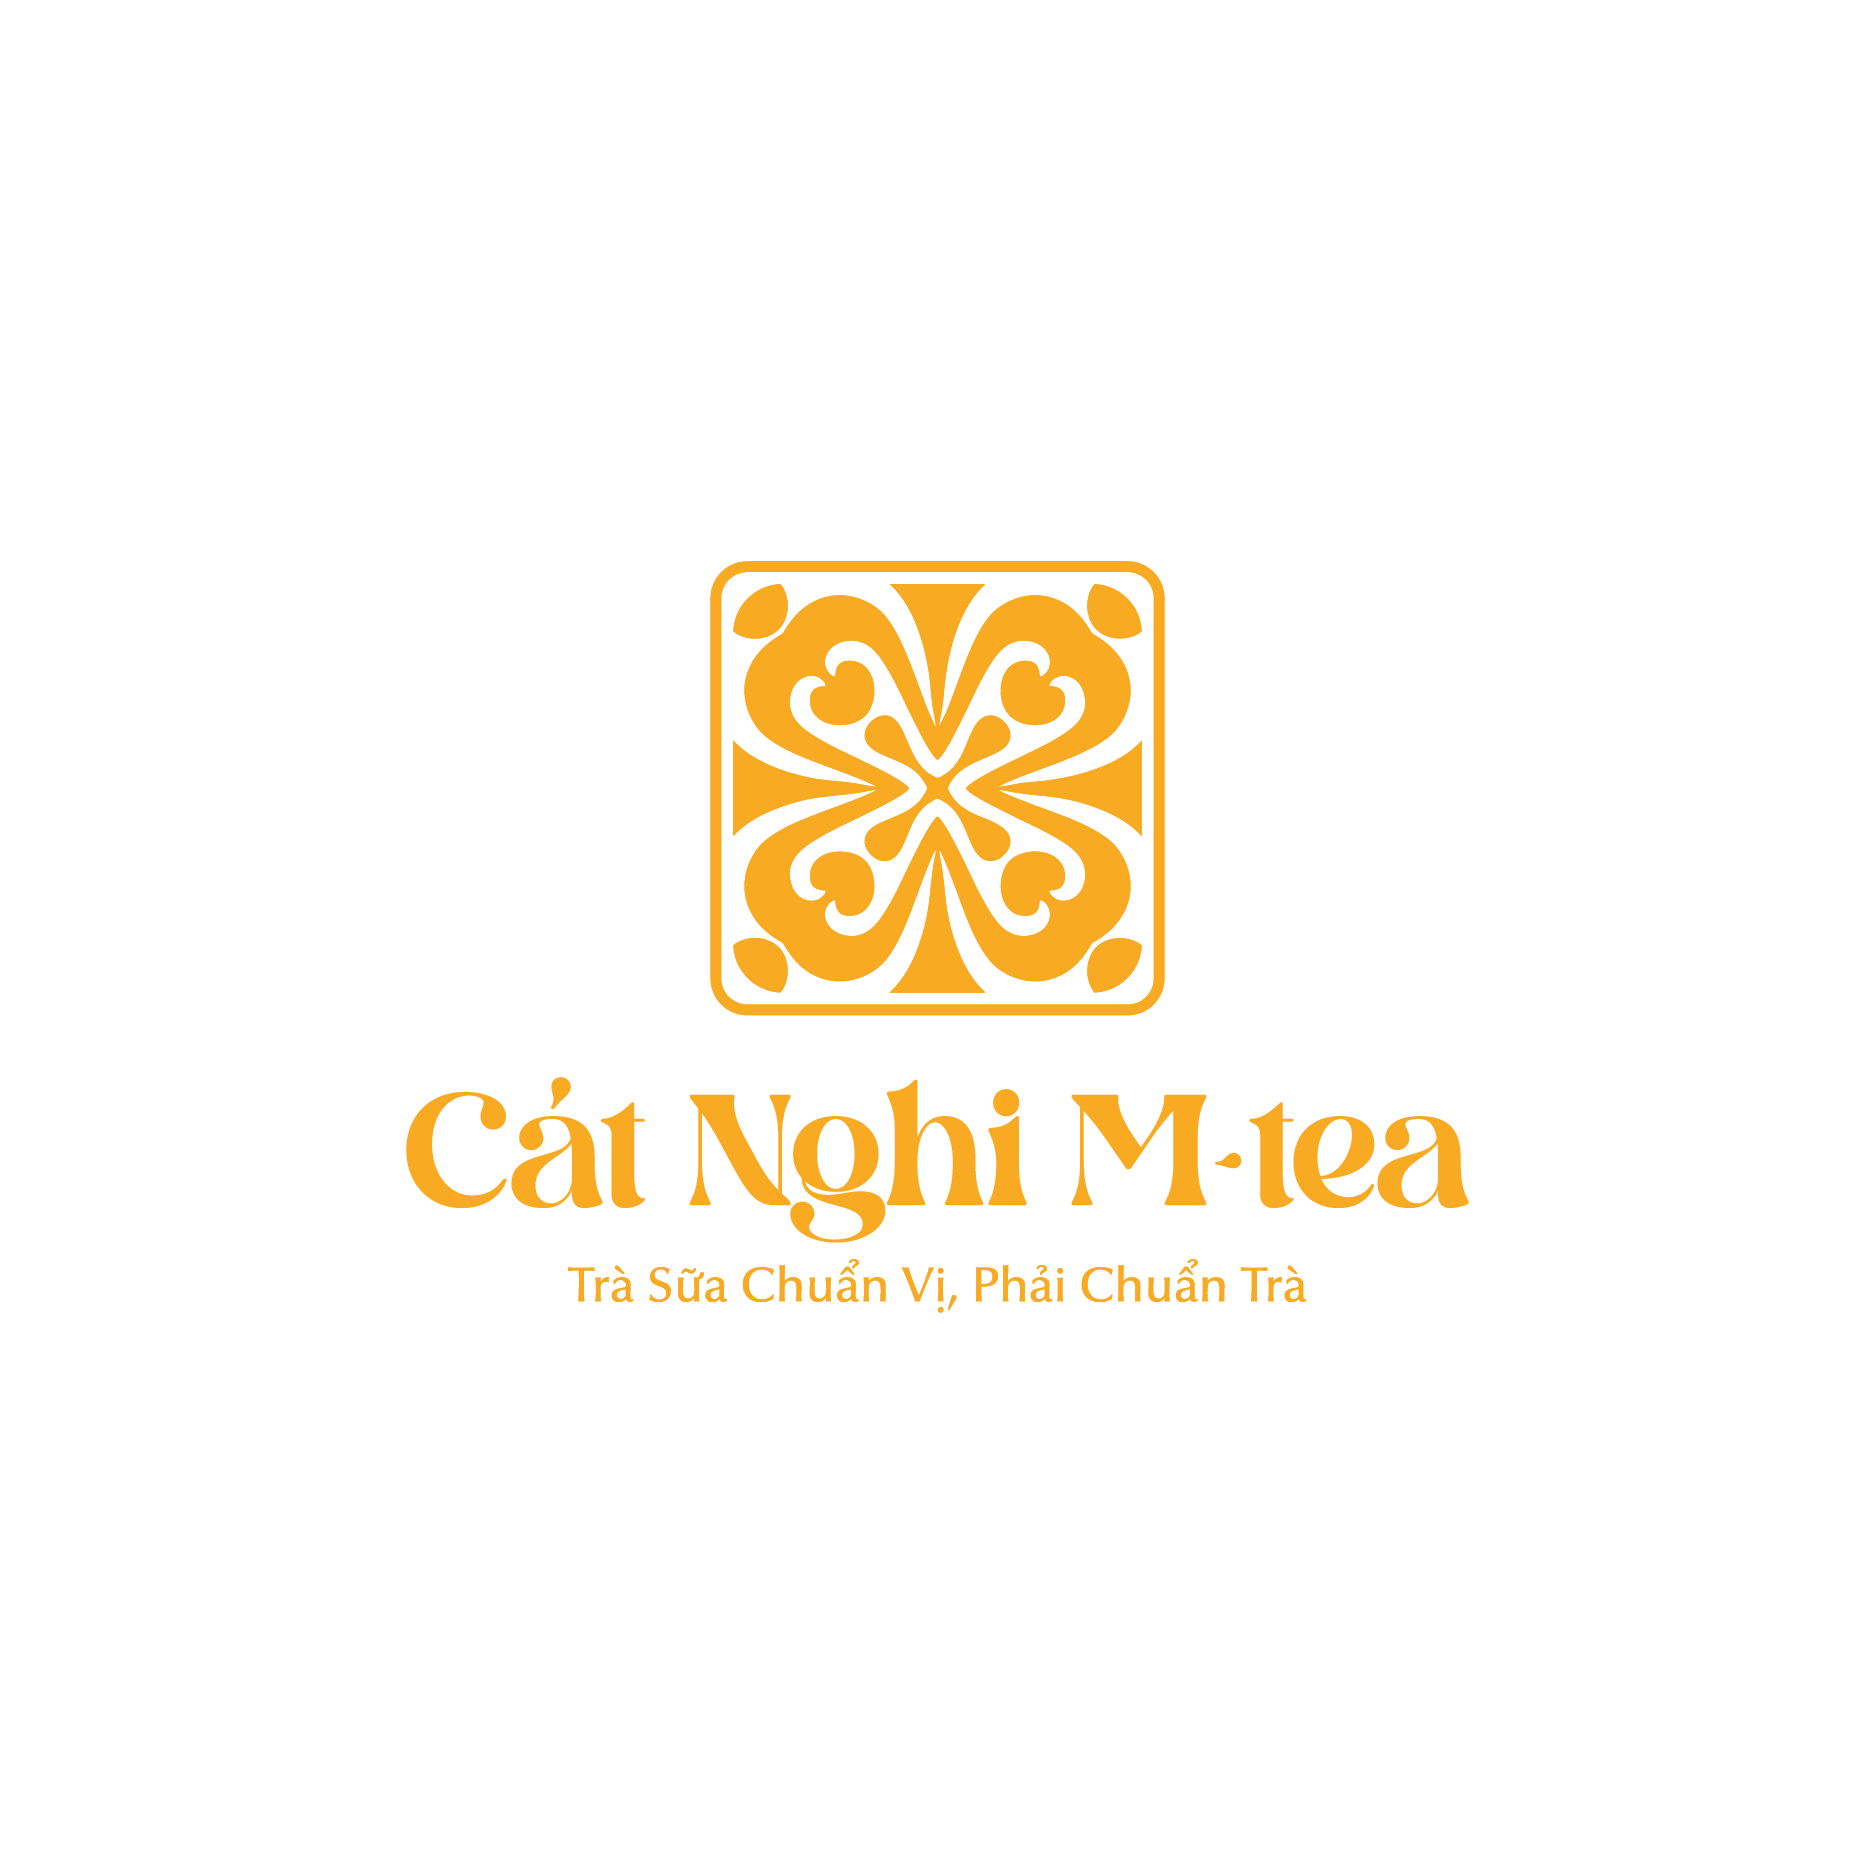 Cat Nghi Tea Trading & Production Company Limited